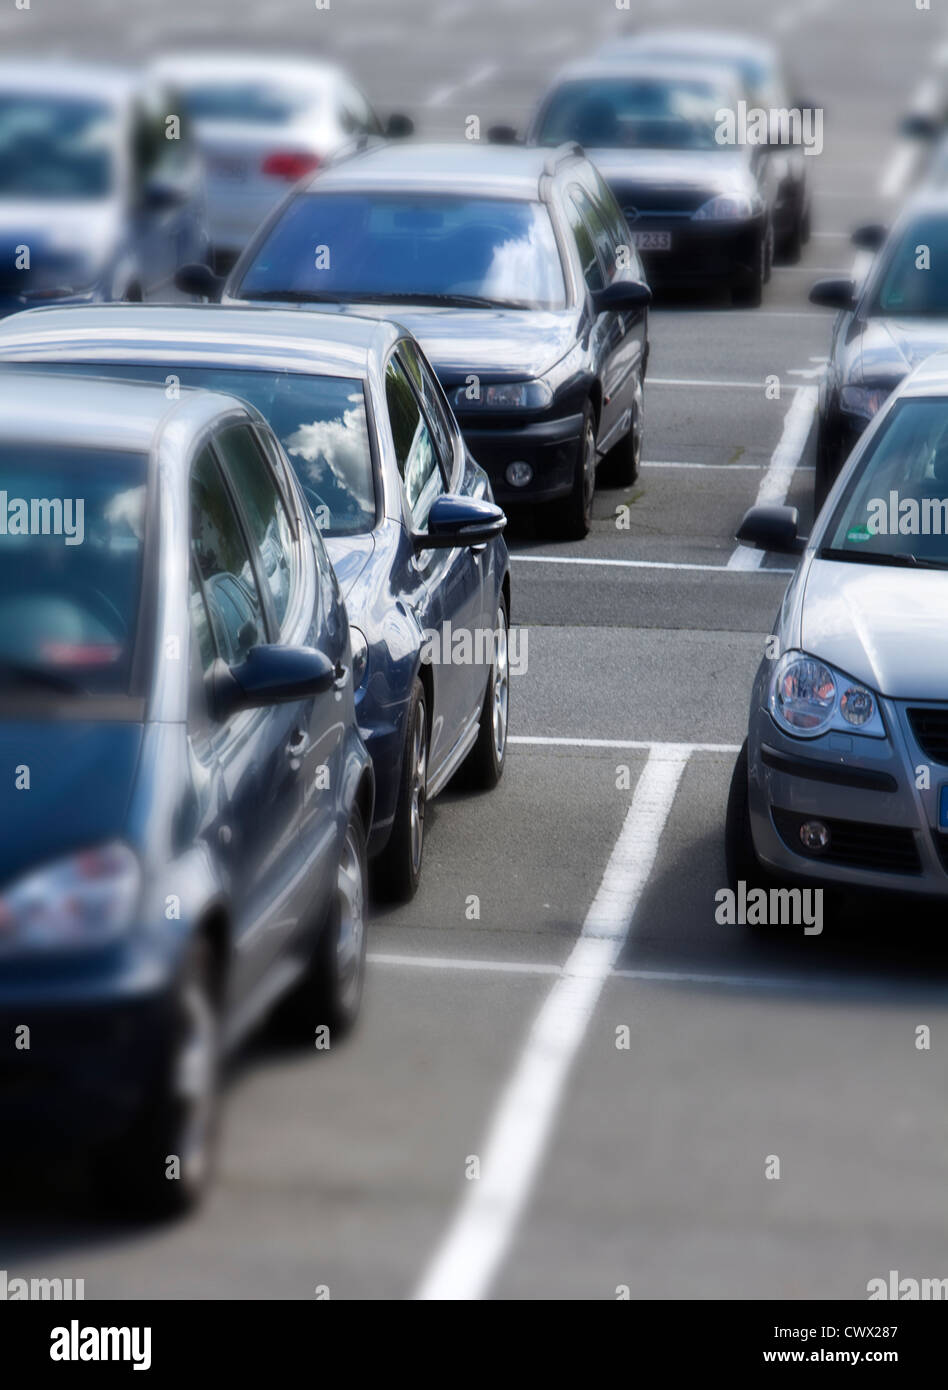 Occupied parking area, concept image, parking spaces in Germany, Europe Stock Photo